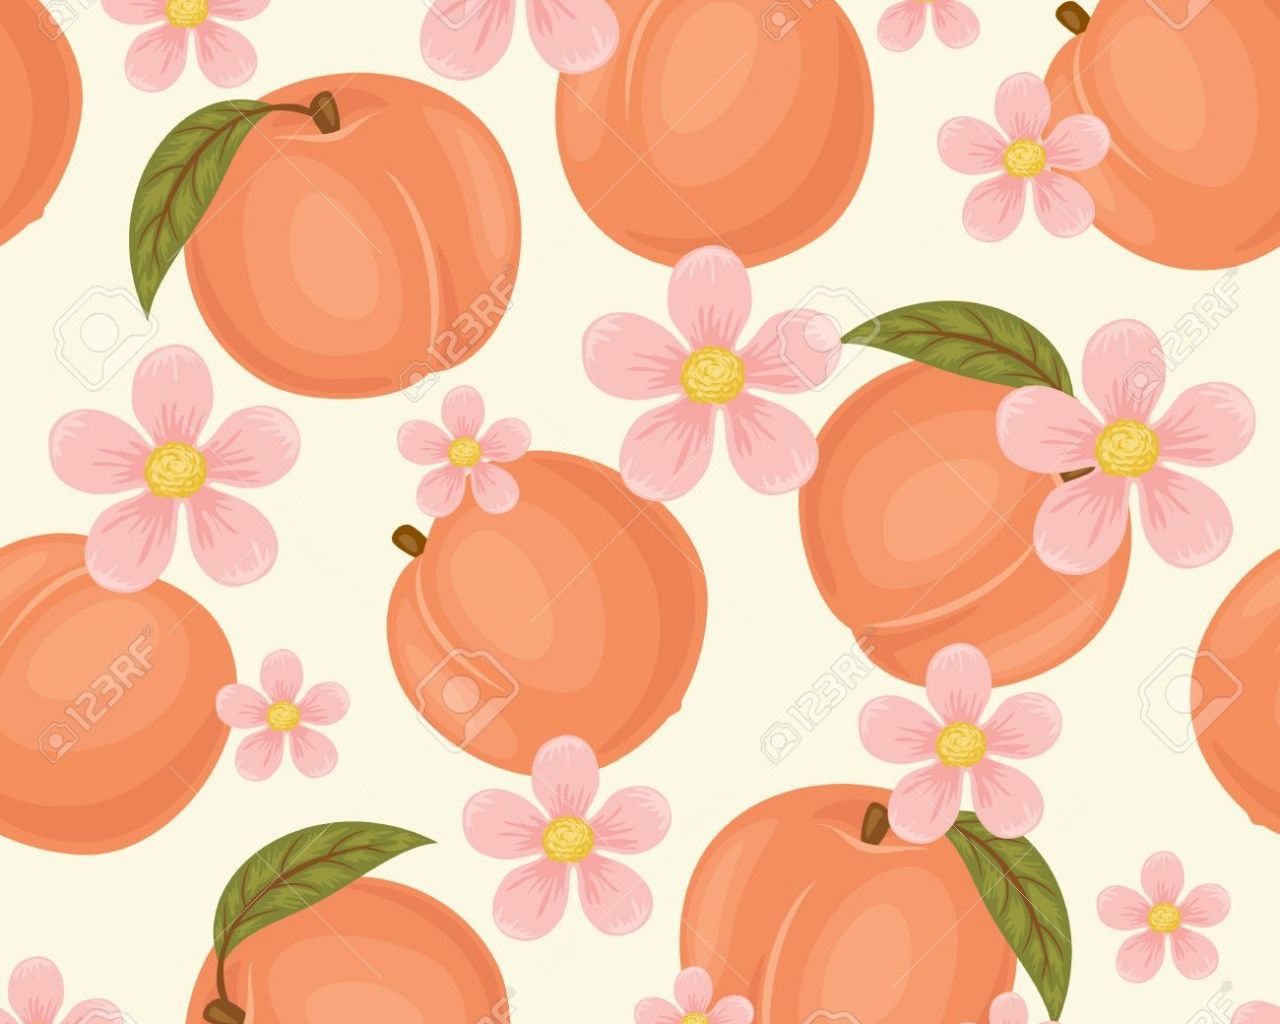 Free download Peach Seamless Pattern Peach Wallpaper Peaches With